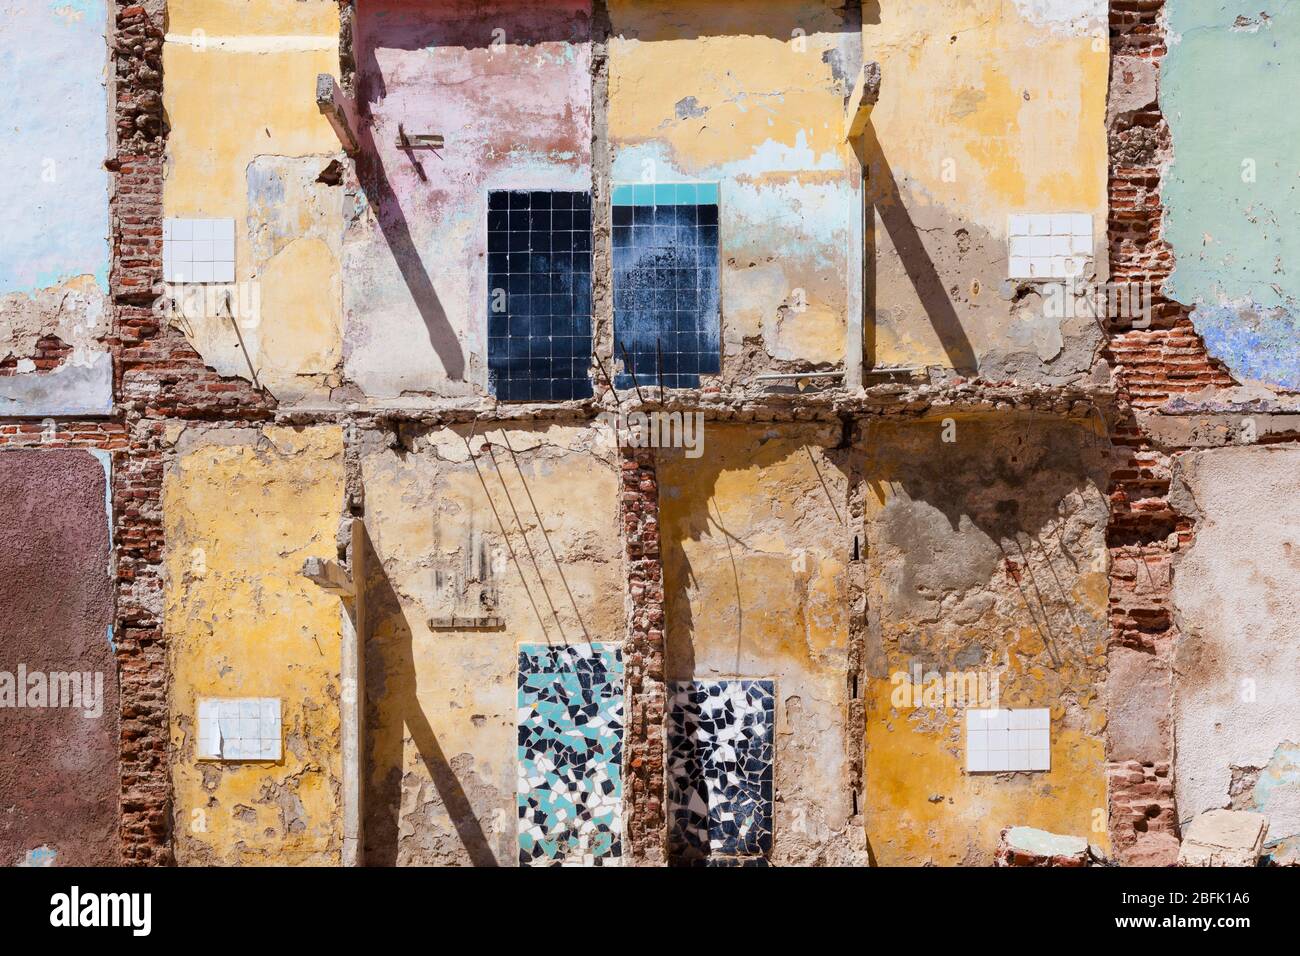 Interior house paint and tiles exposed by demolition in the old quarter of Saint Louis, Senegal. Stock Photo